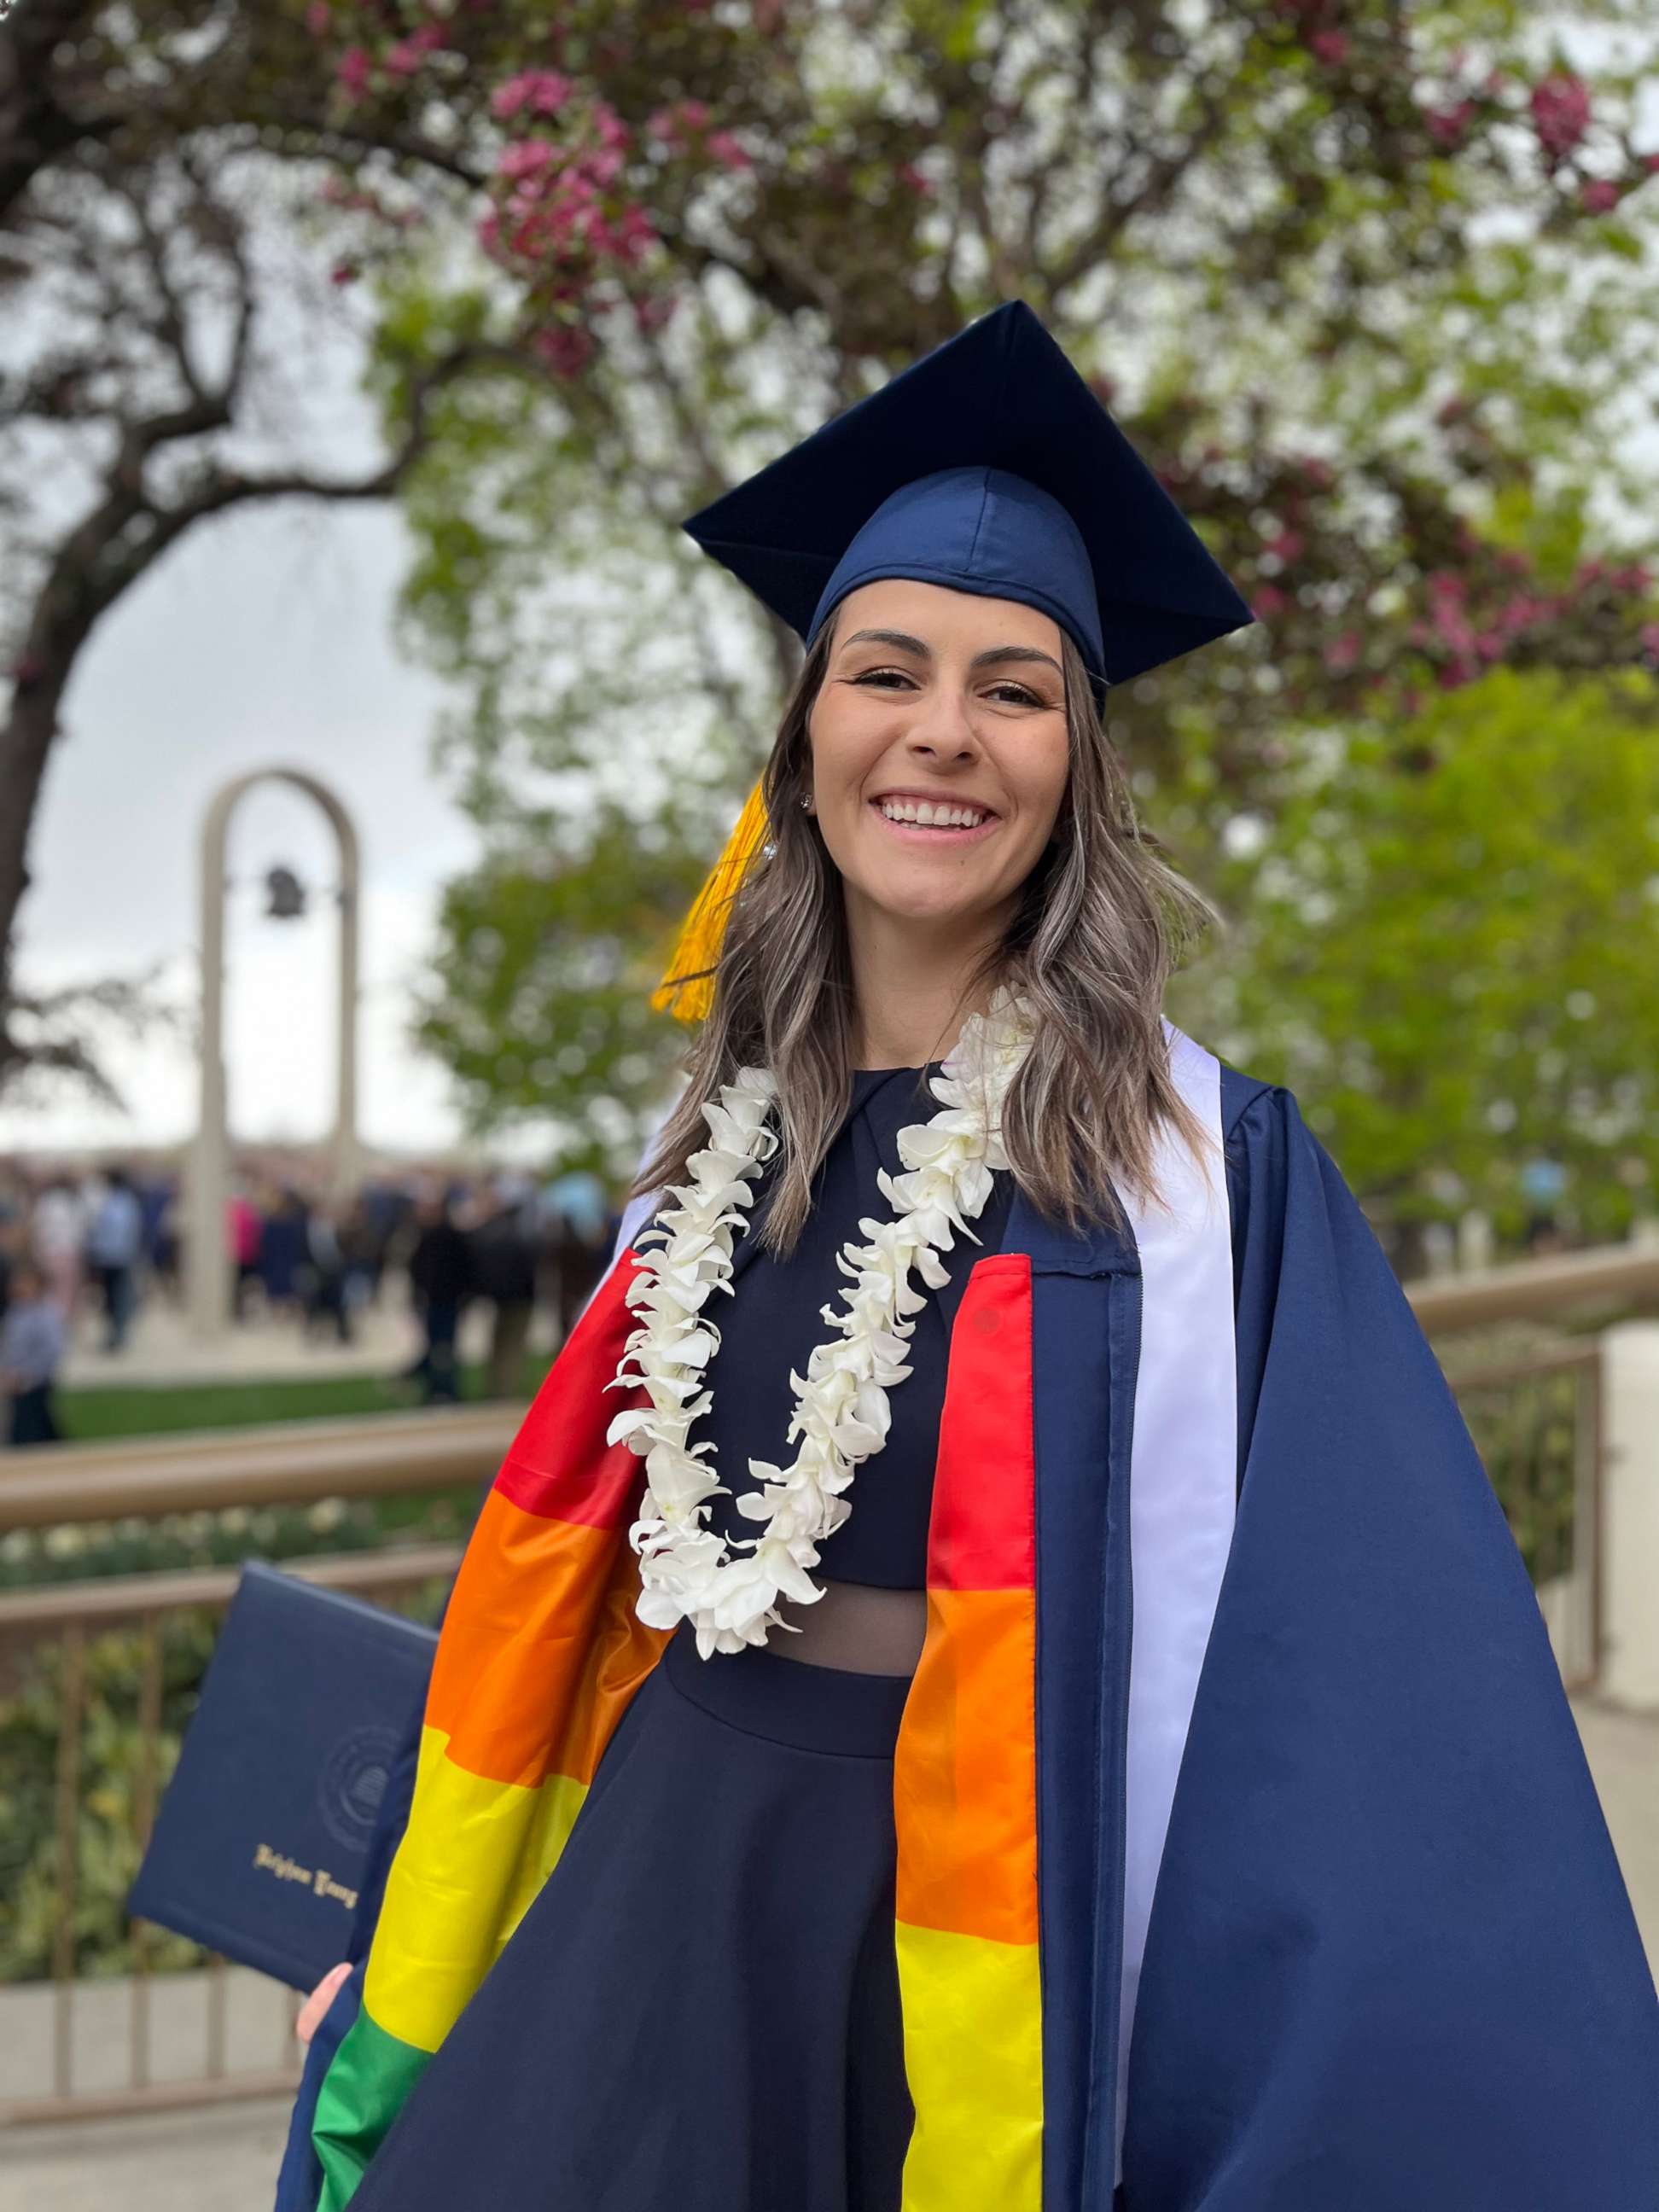 PHOTO: Jillian Orr poses with her modified graduation gown. Her sister, Rachel Orr, helped her sew a gay pride flag on the inside of her gown.